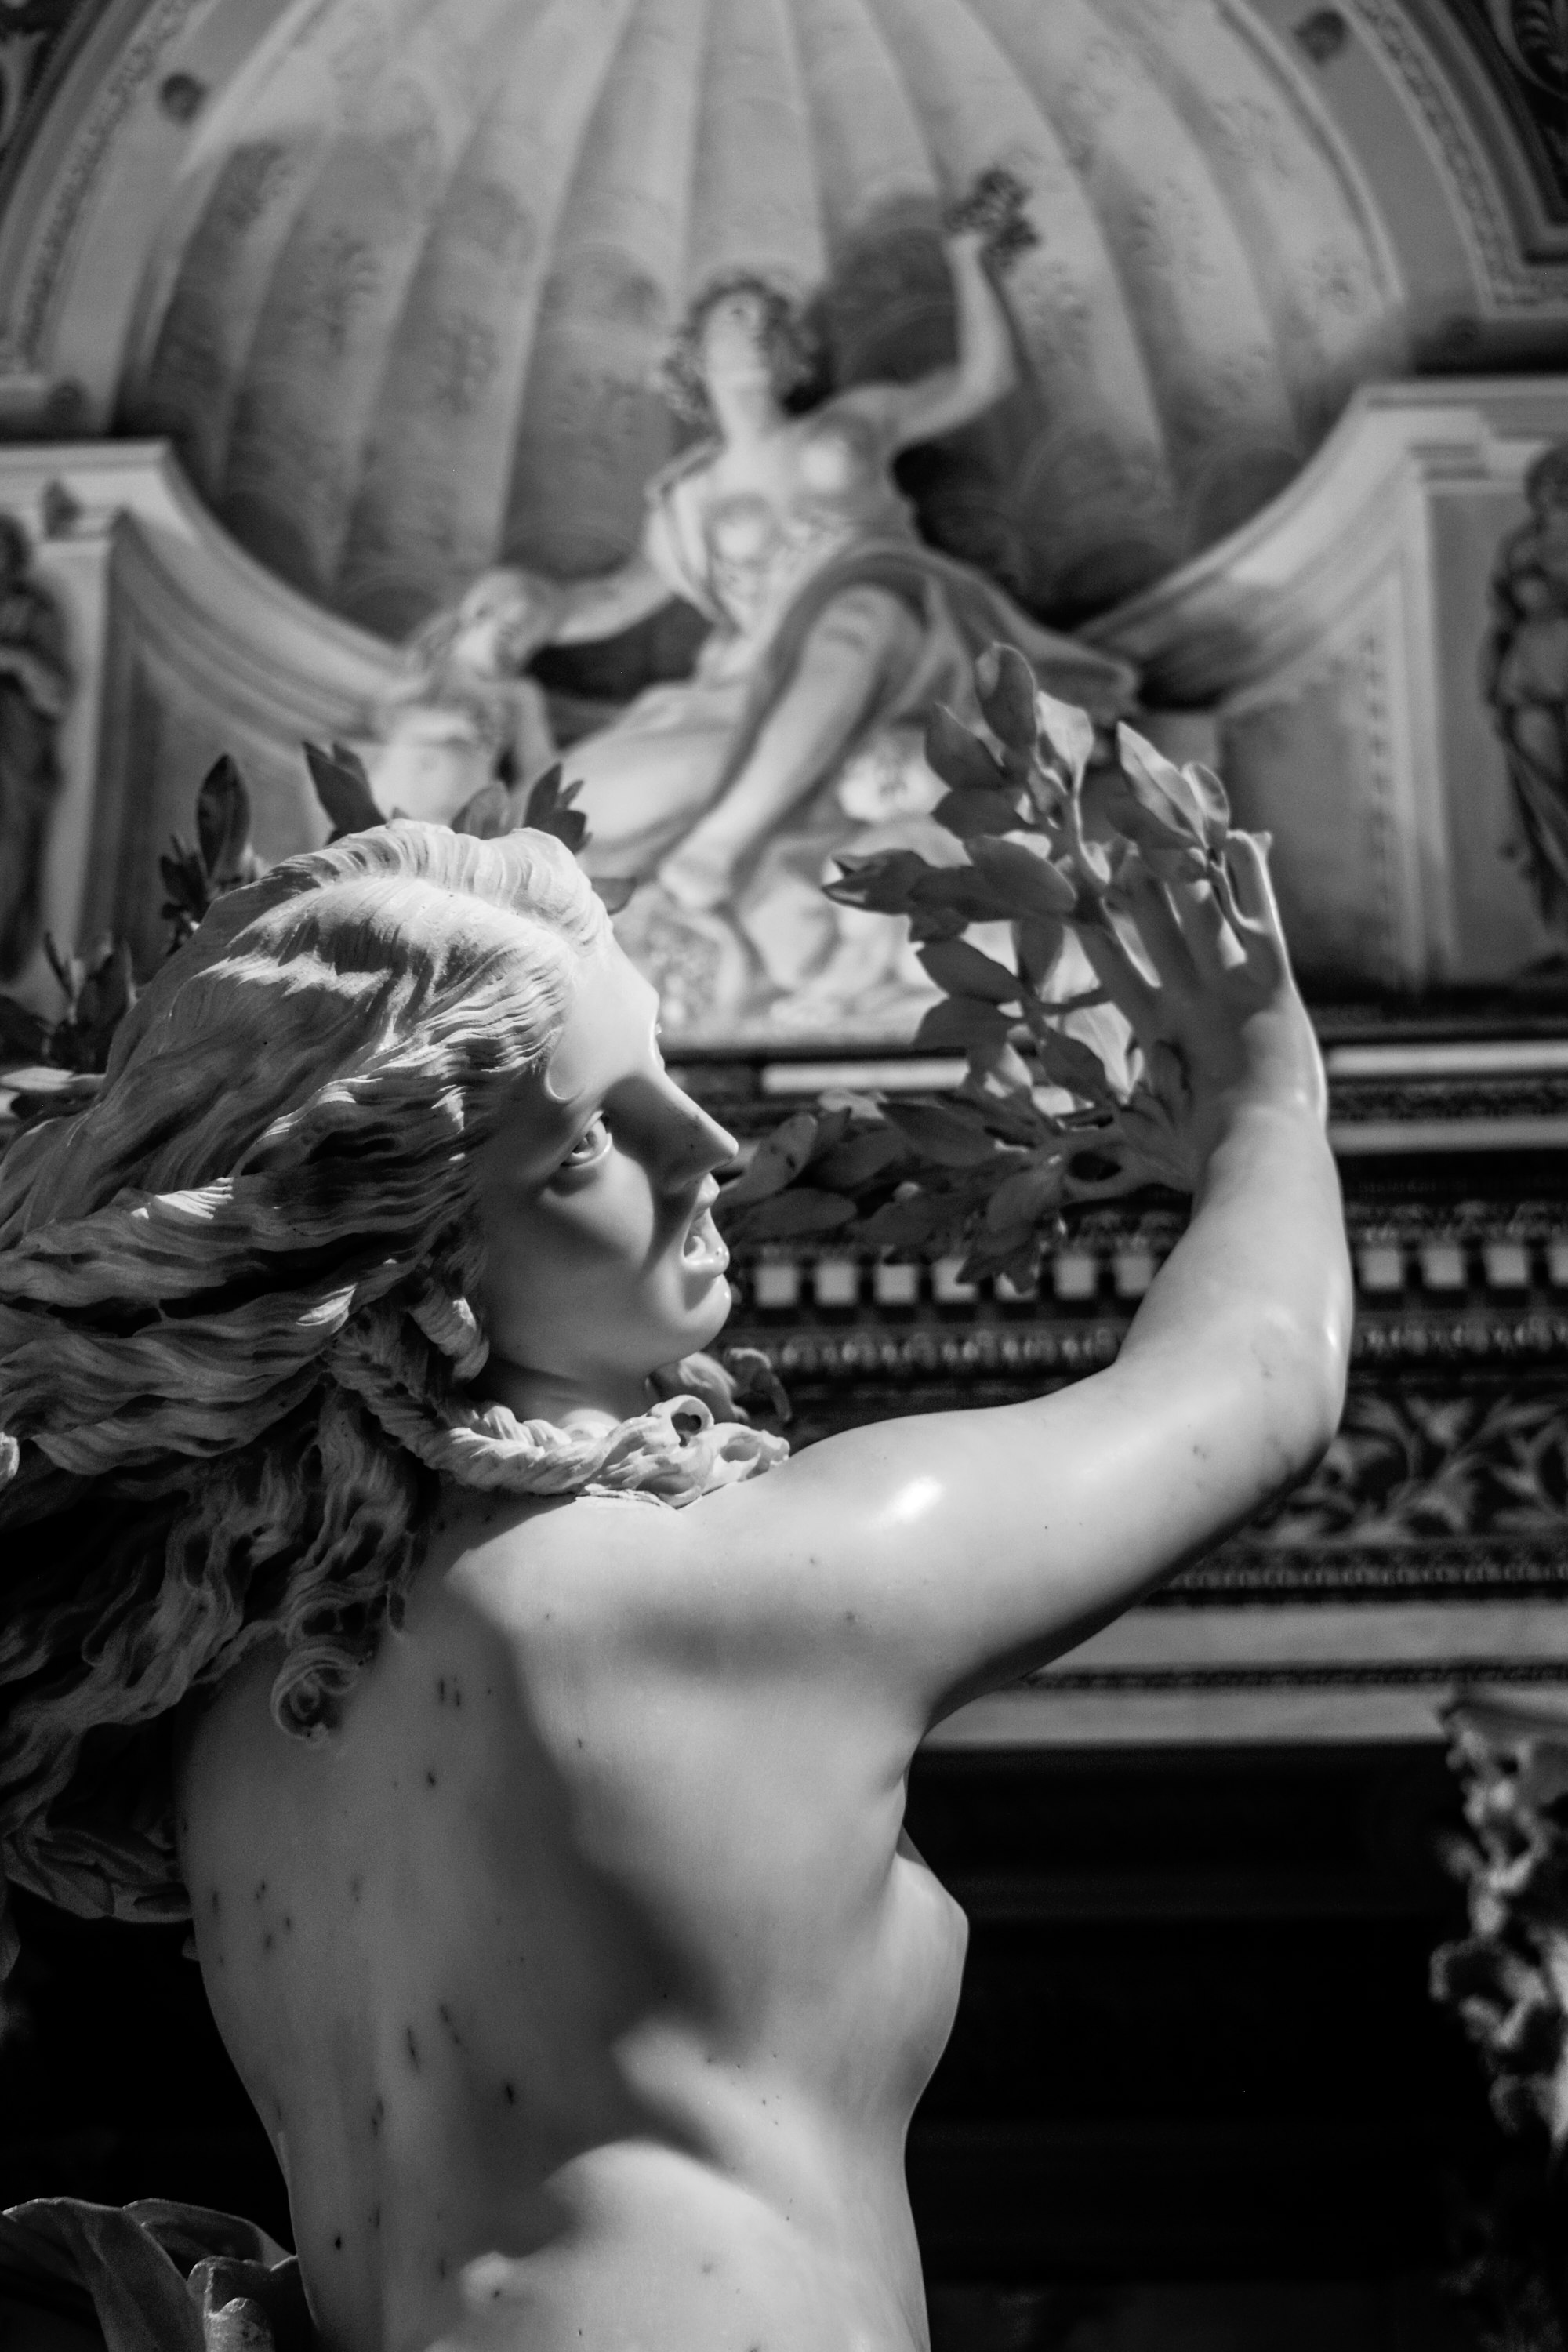 Another angle from Apollo and Daphne.You can see her hands becoming a tree branch, in answer to her prayer.
According to the mith, described in Ovidio´s Metamorphoses, Apollo, fated by Cupid's arrow, sees Daphne and is filled with wonder at her beauty. But Daphne has been fated by Cupid's love-repelling arrow and denies the love of men. She ran away and prayed, askng her father, Peneus, to destroy her beauty. Then, she became a tree.